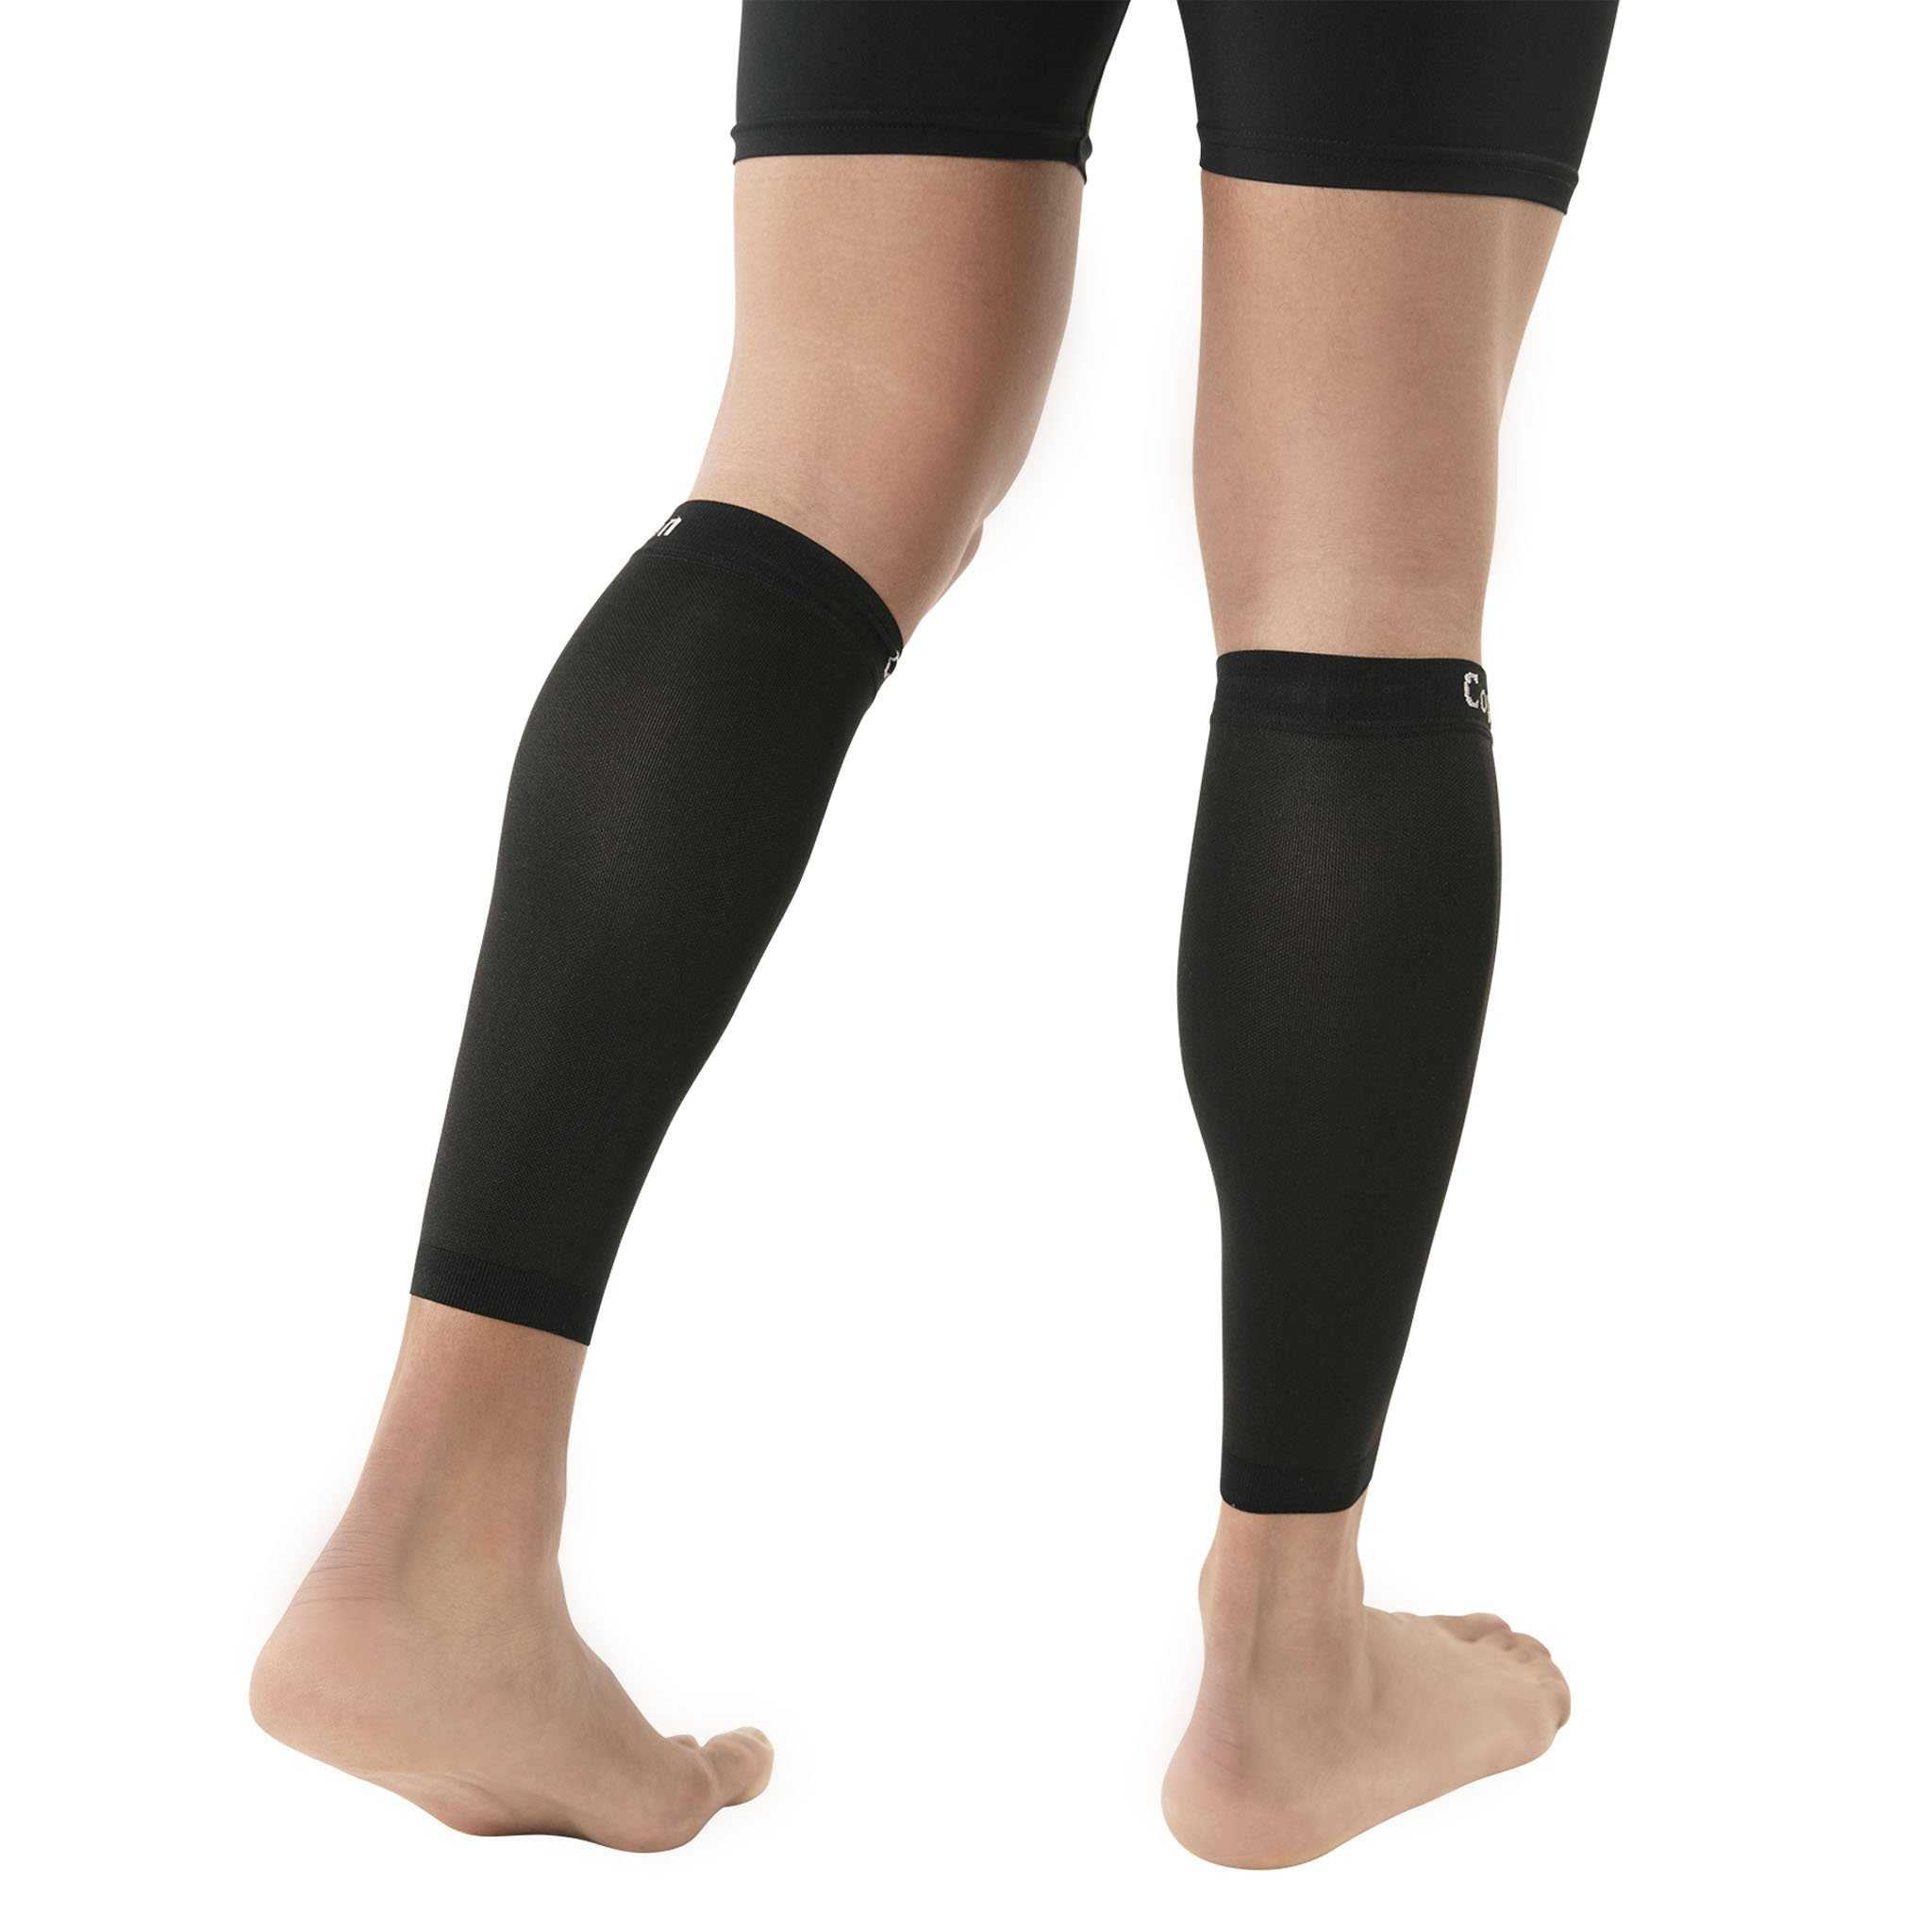 Copper Compression Calf & Leg Sleeves - Fit & Performance Matters